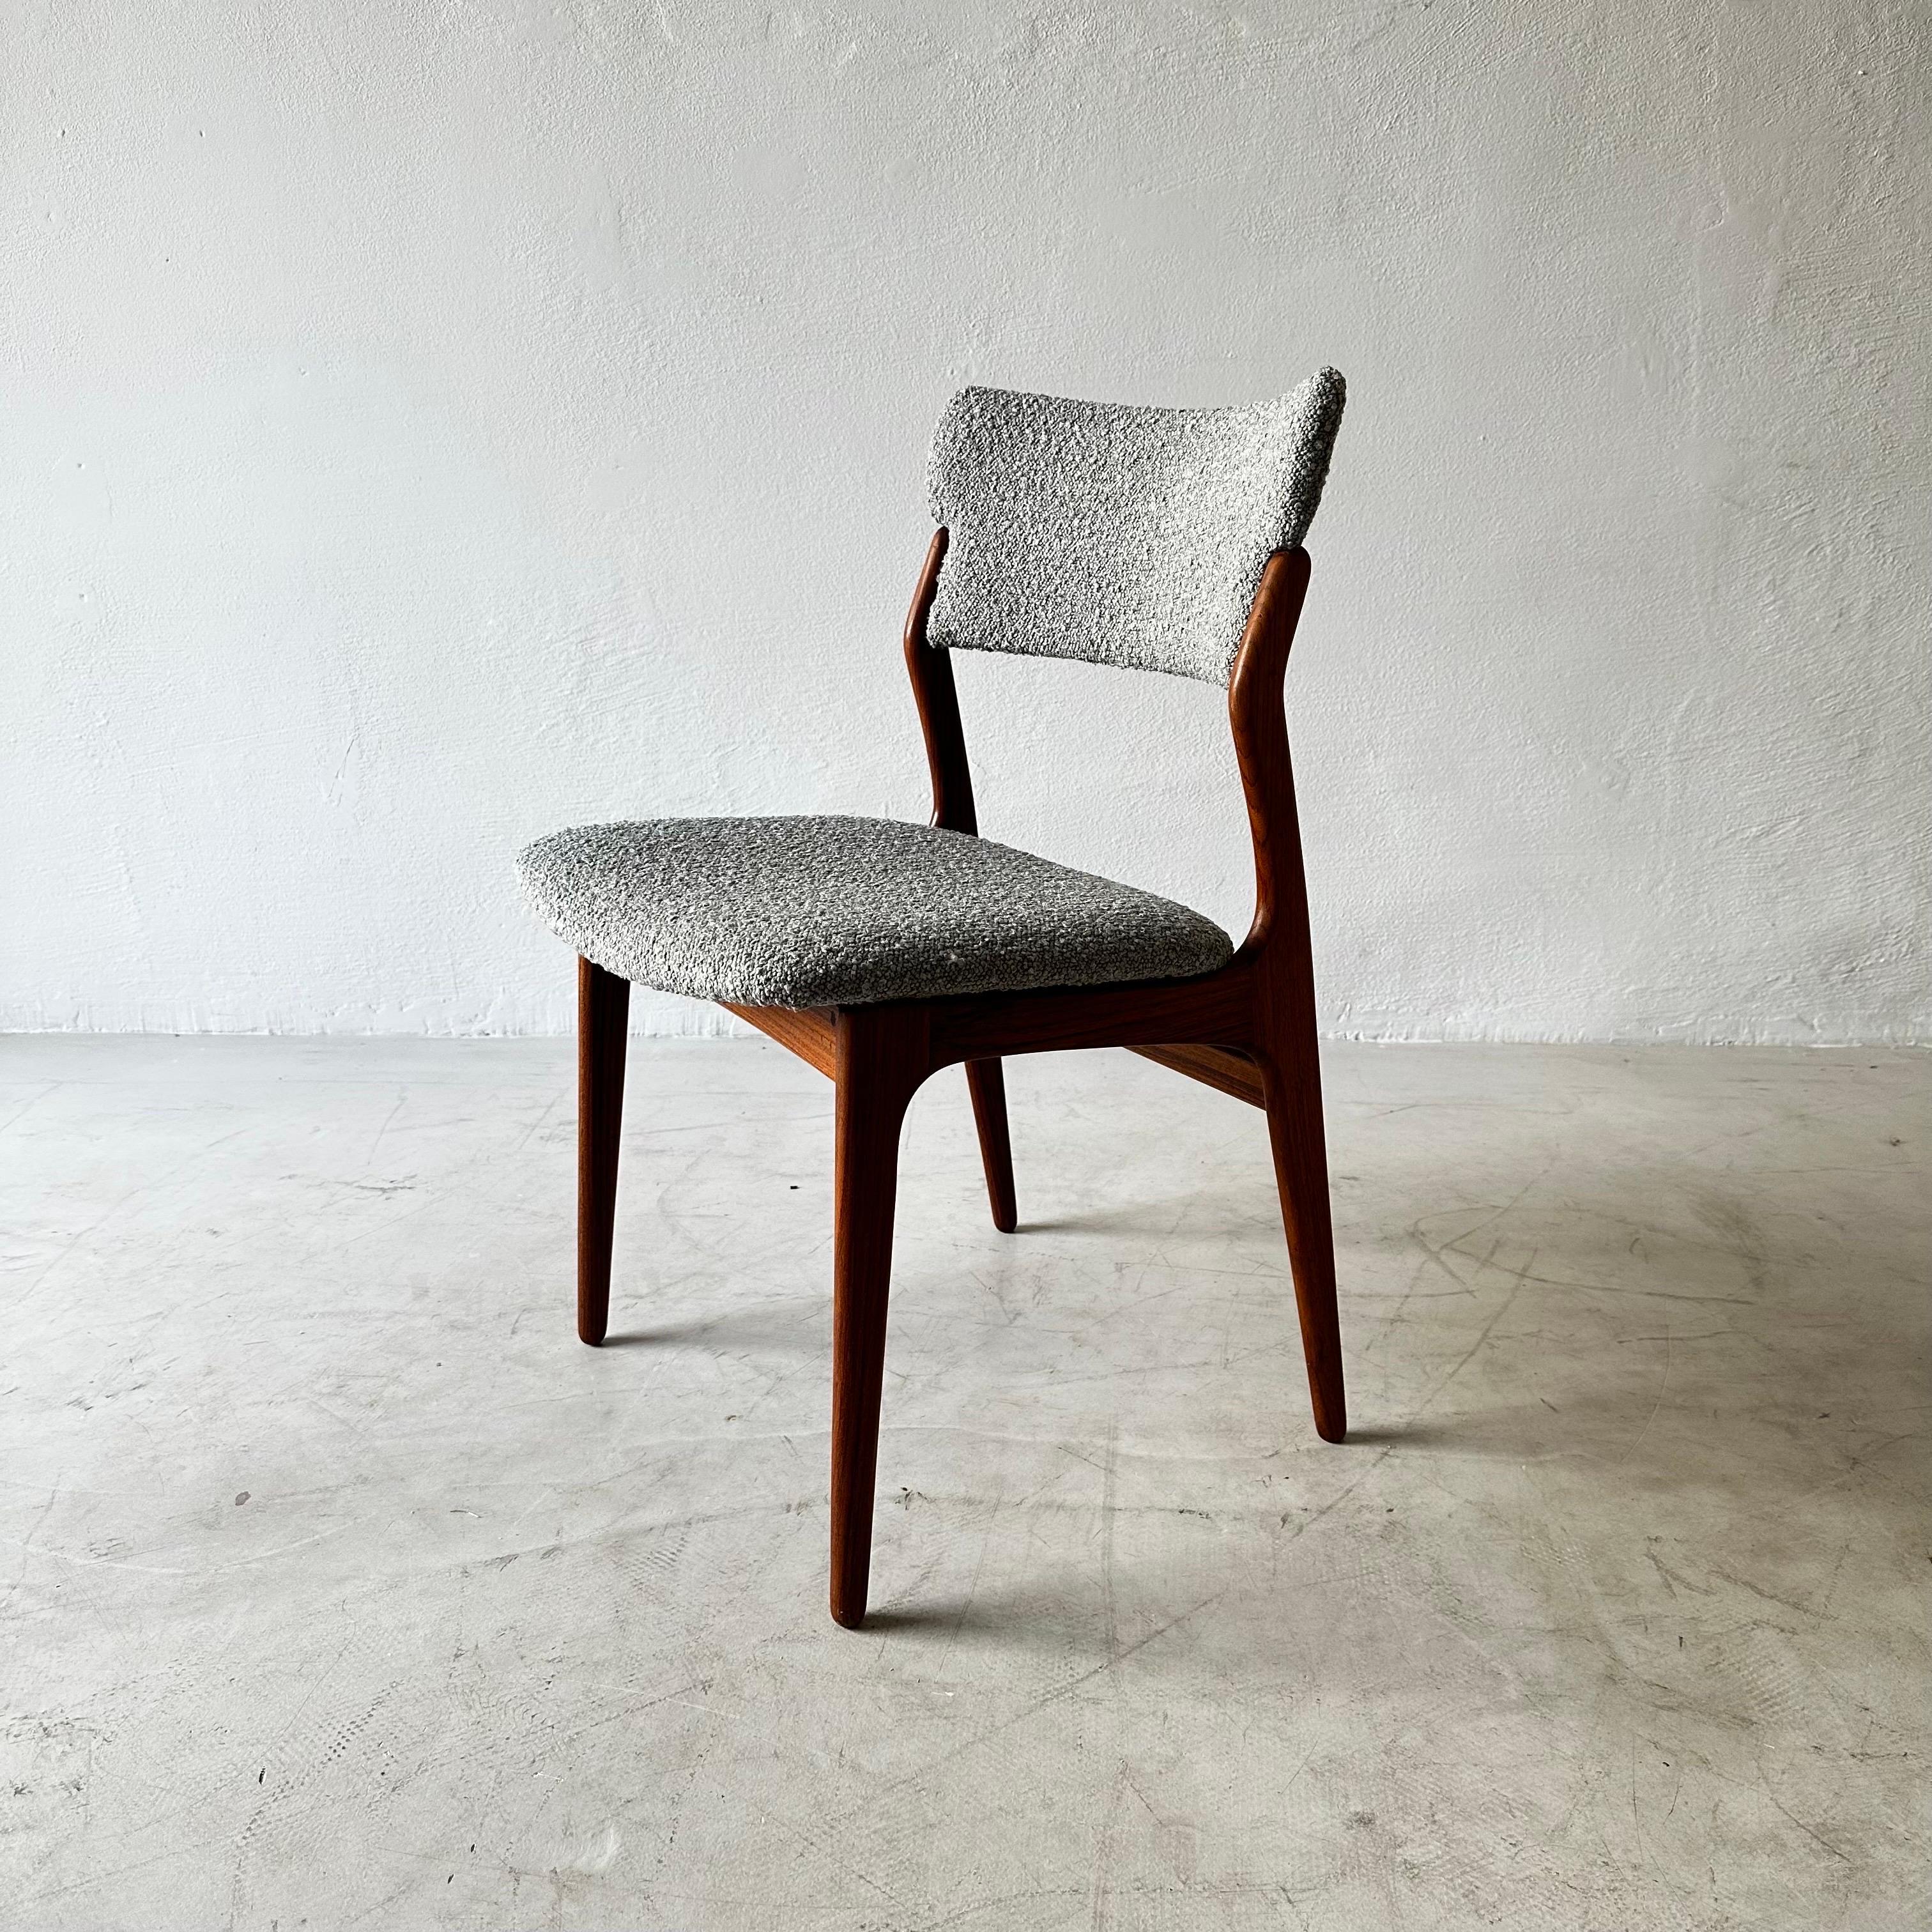 Rare Set of 8 Sculptural Scandinavian Dining Chairs, Denmark, 1960s In Good Condition For Sale In Vienna, AT